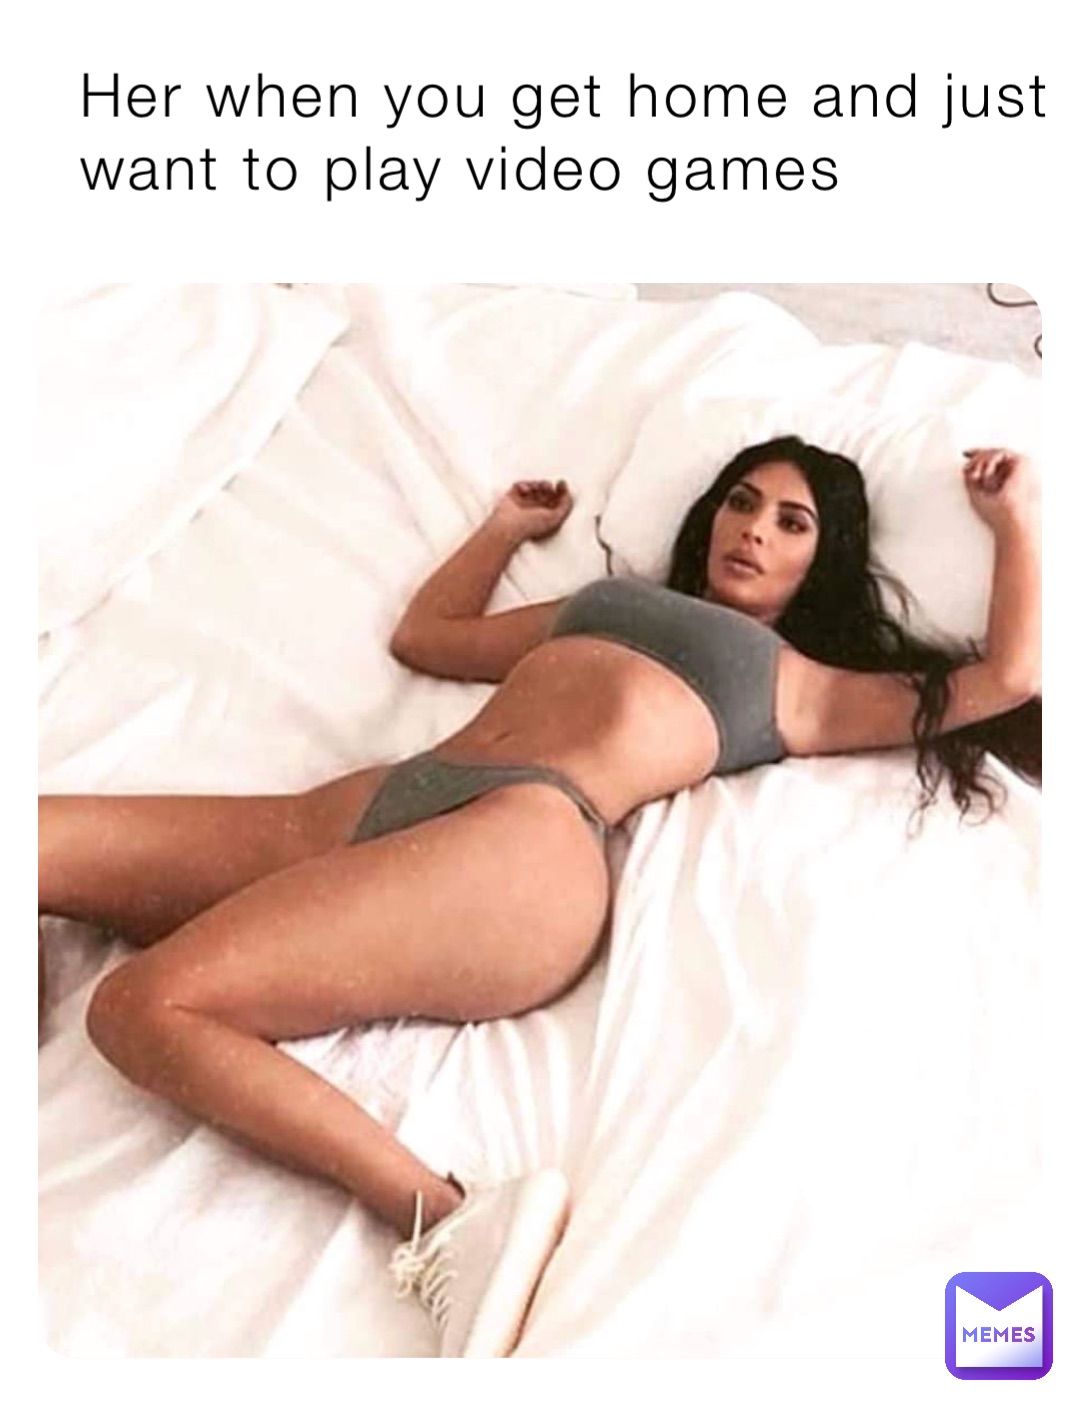 Her when you get home and just want to play video games